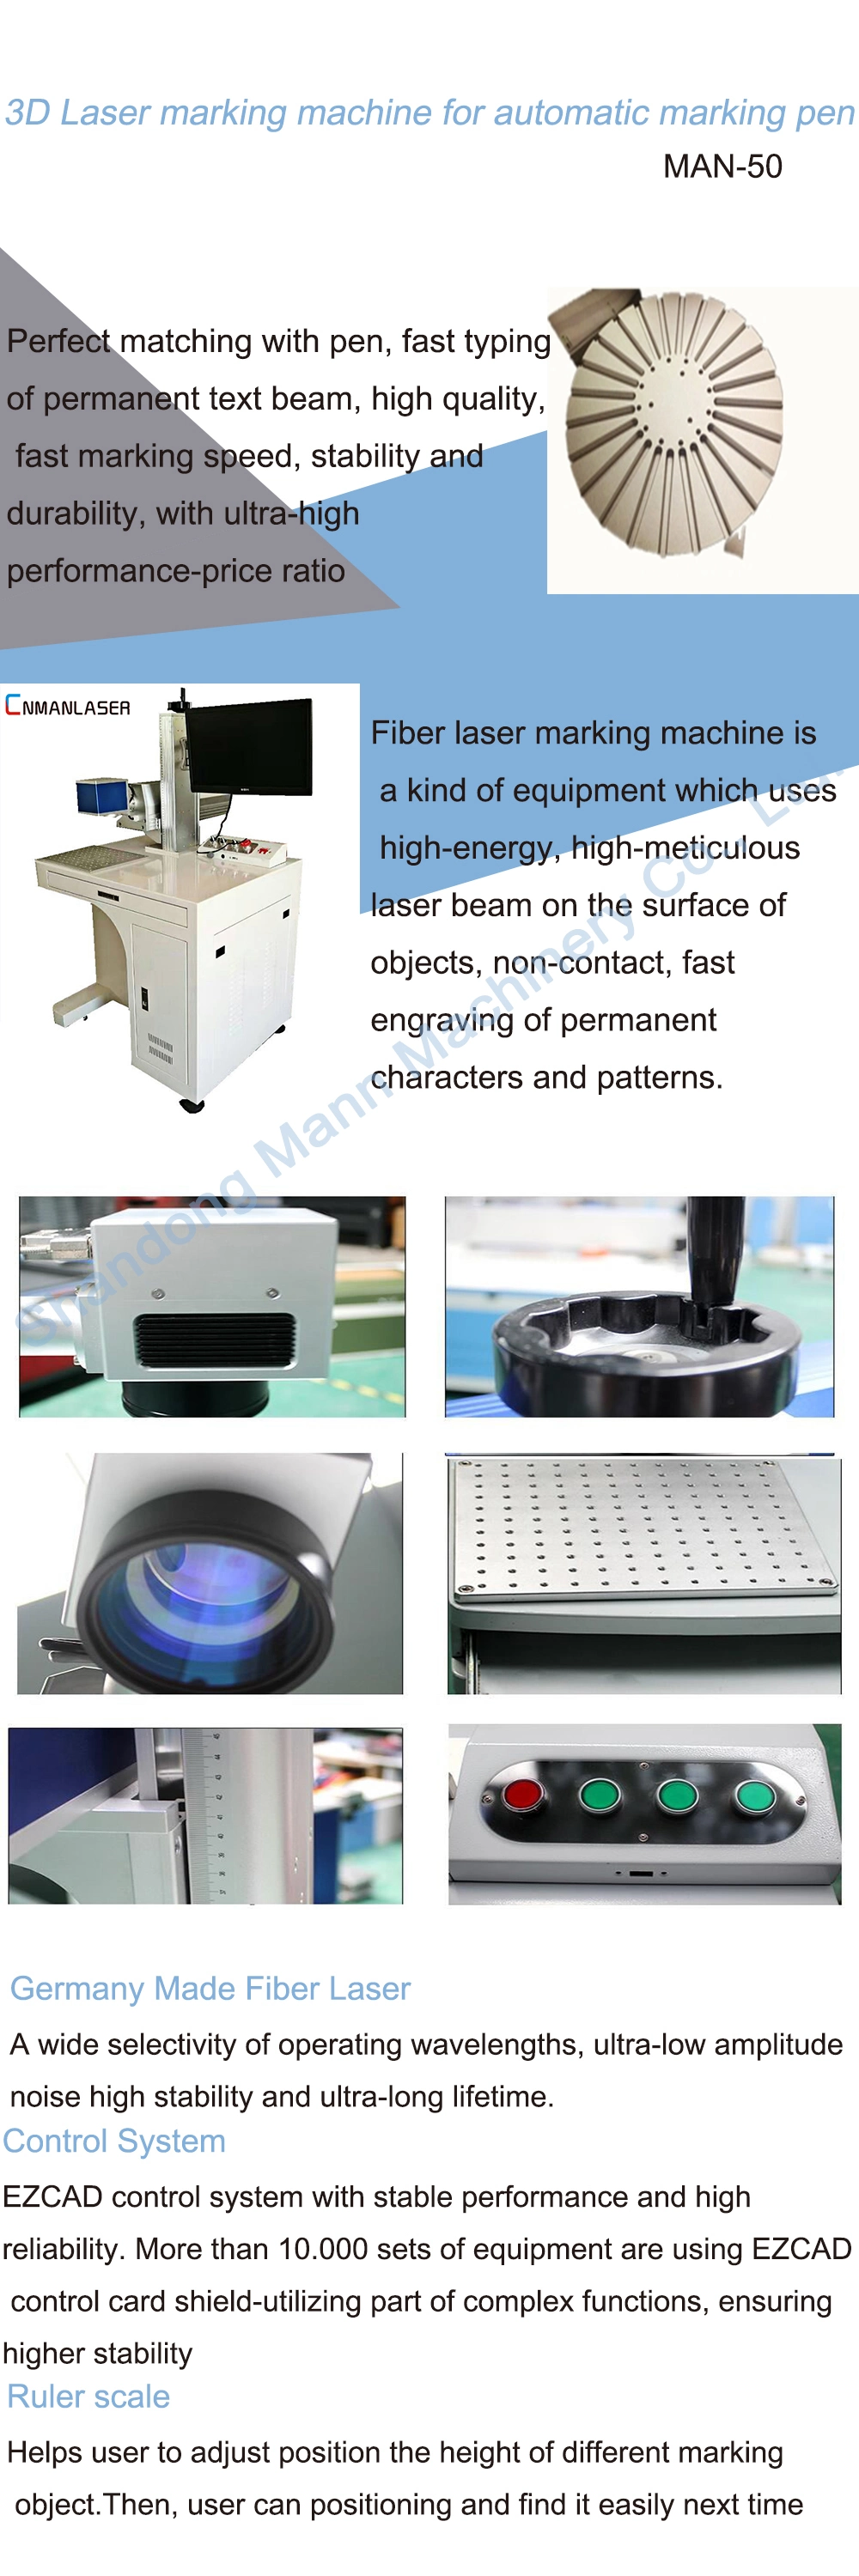 3D Laser Marking Machine for Automatic Marking Pen